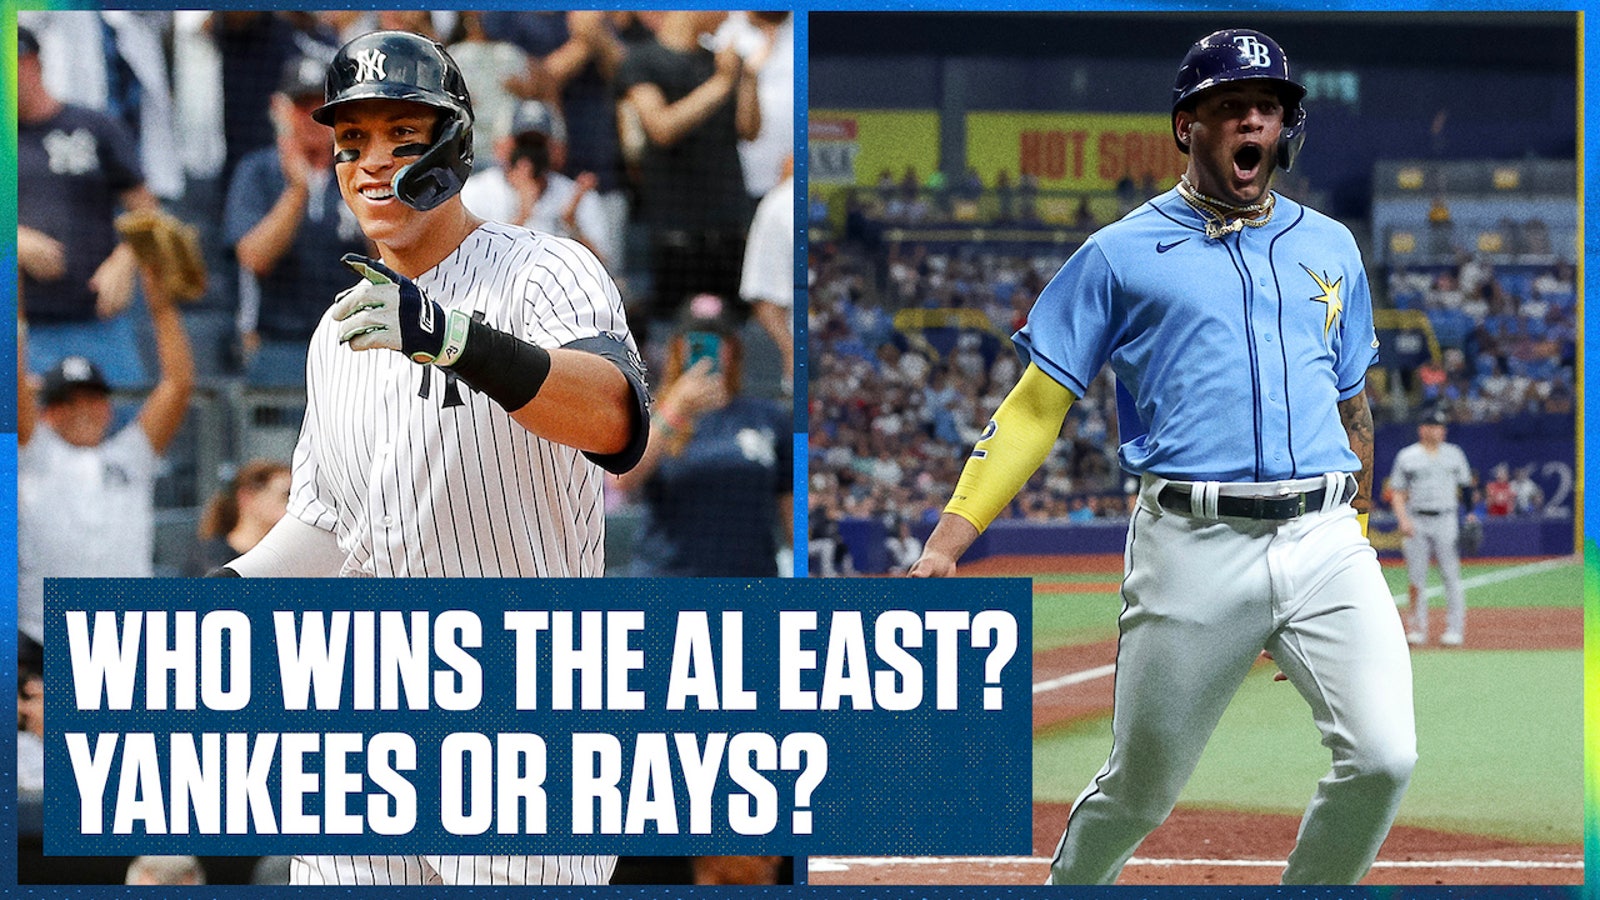 Yankees and Rays heat up the AL East